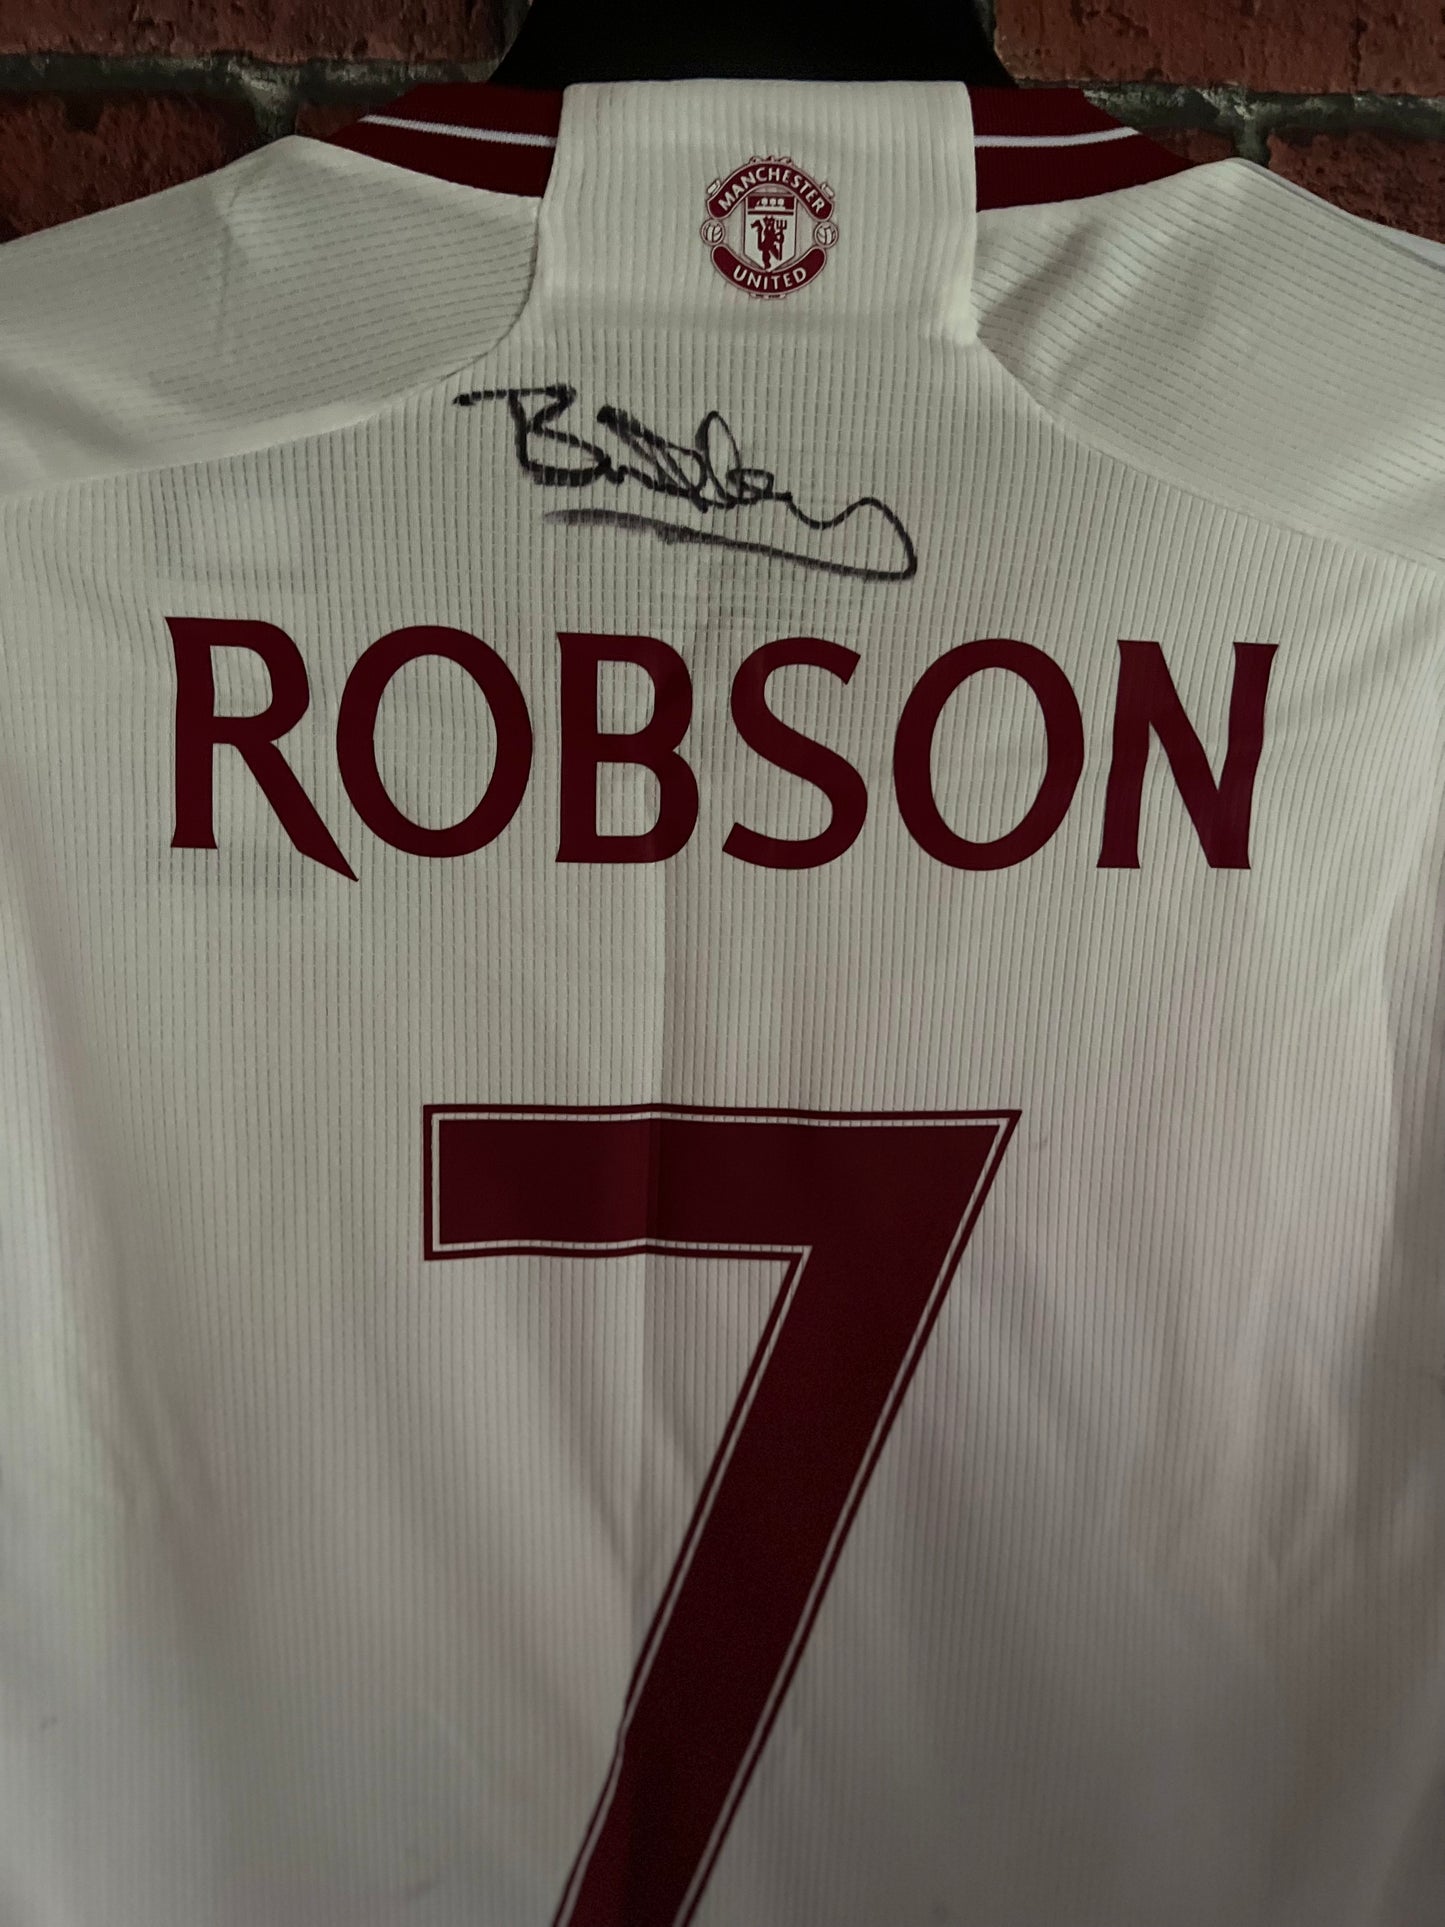 Signed Bryan Robson Manchester United 23/24 3rd Shirt